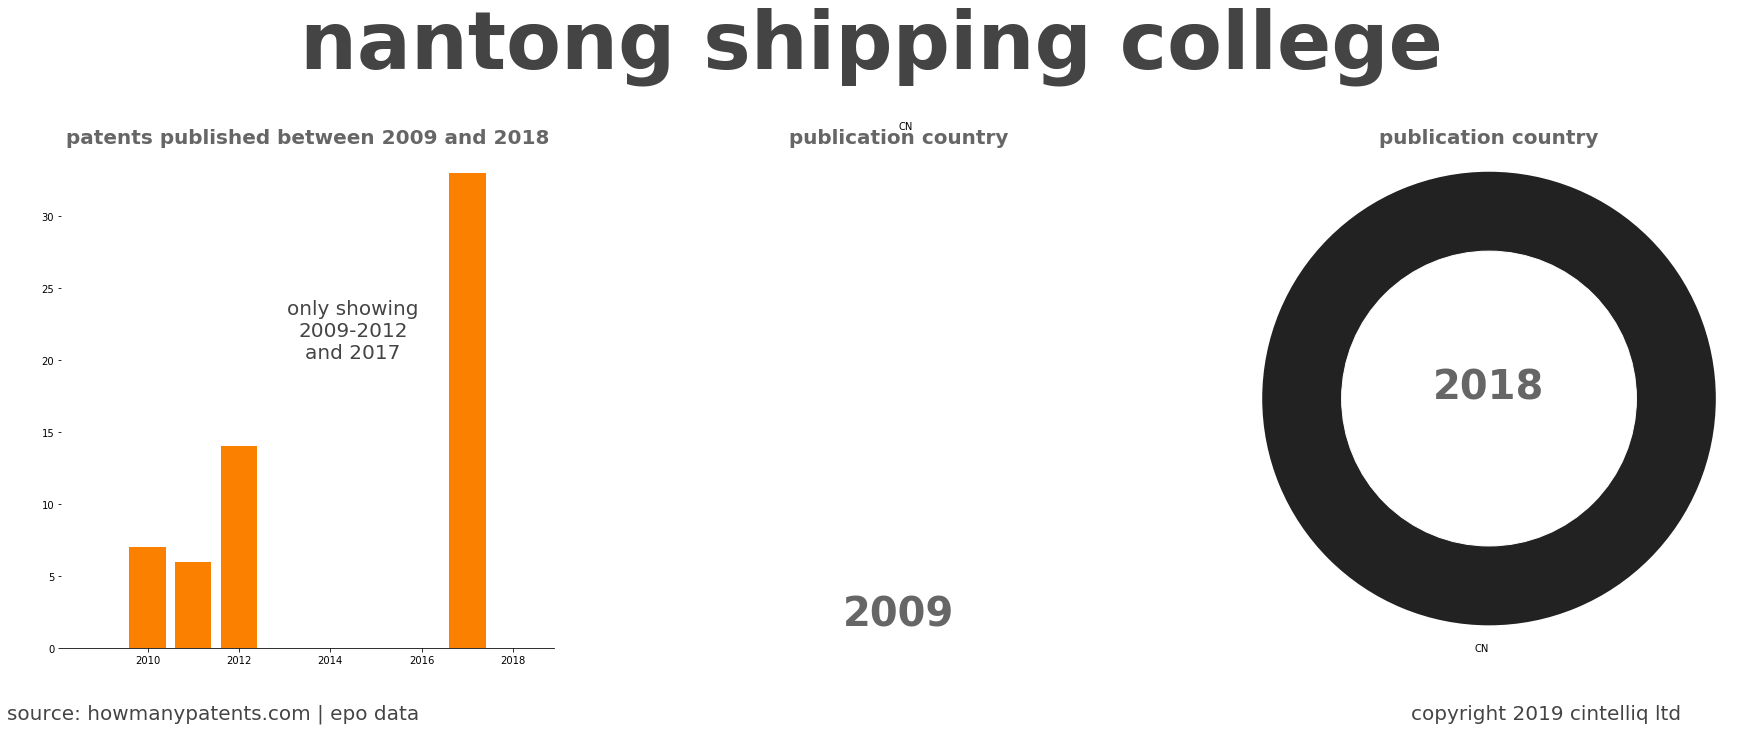 summary of patents for Nantong Shipping College